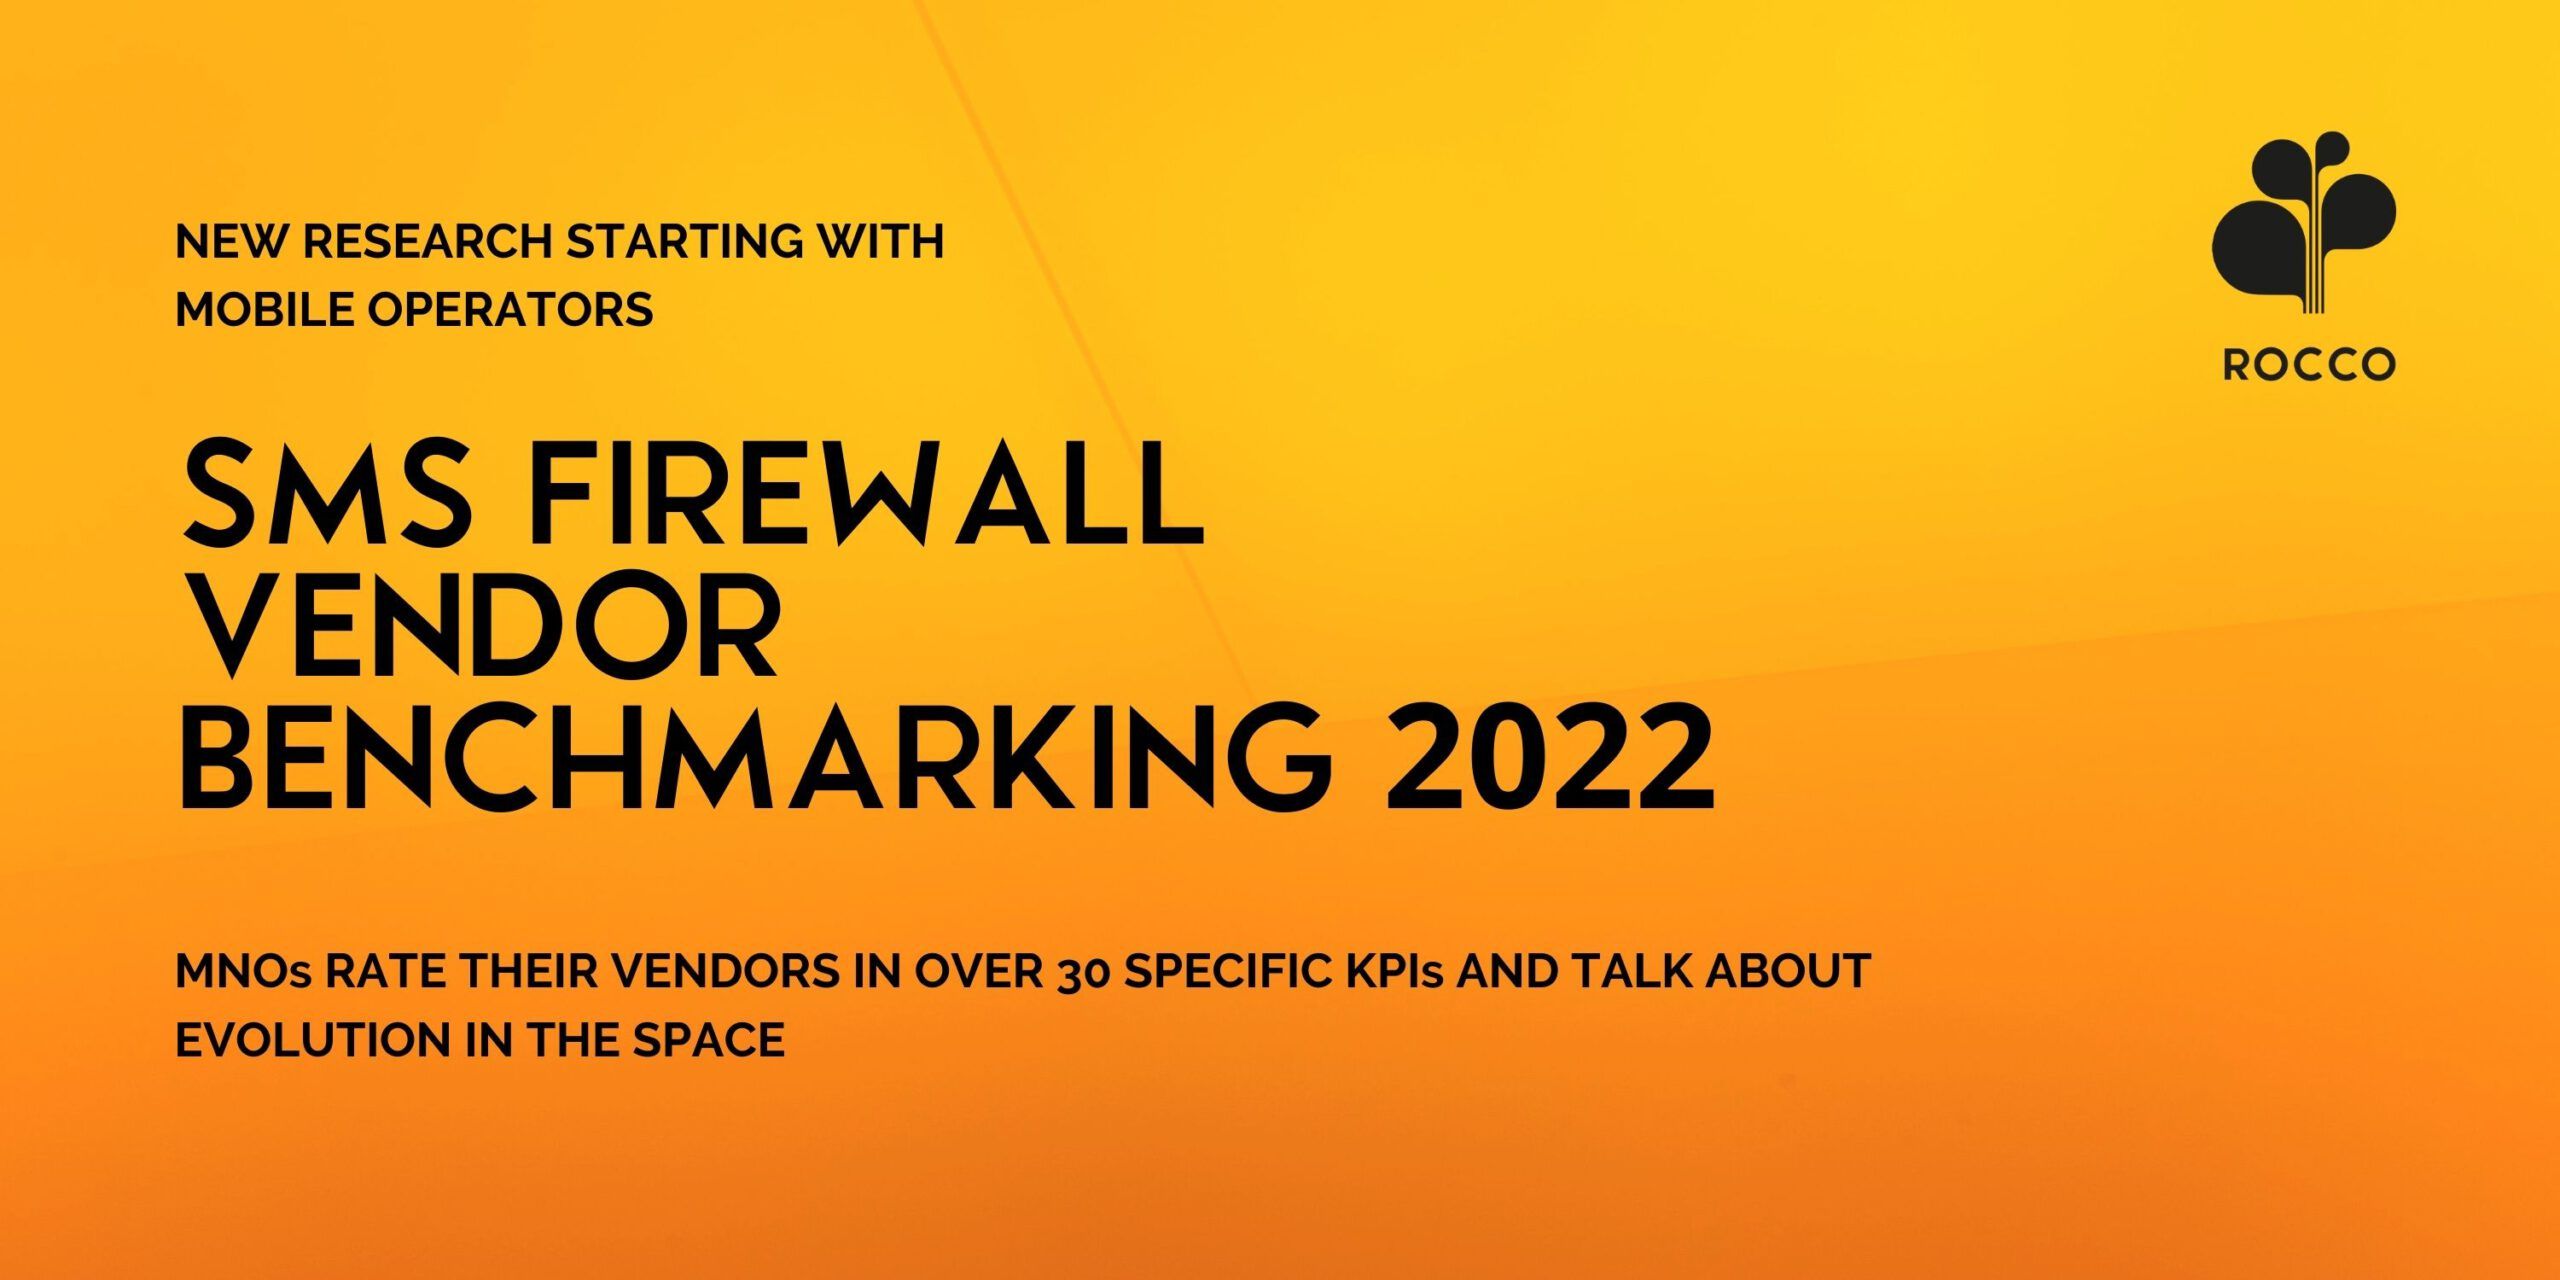 New SMS Firewall Vendor Benchmarking Survey for 2022 Just Launched